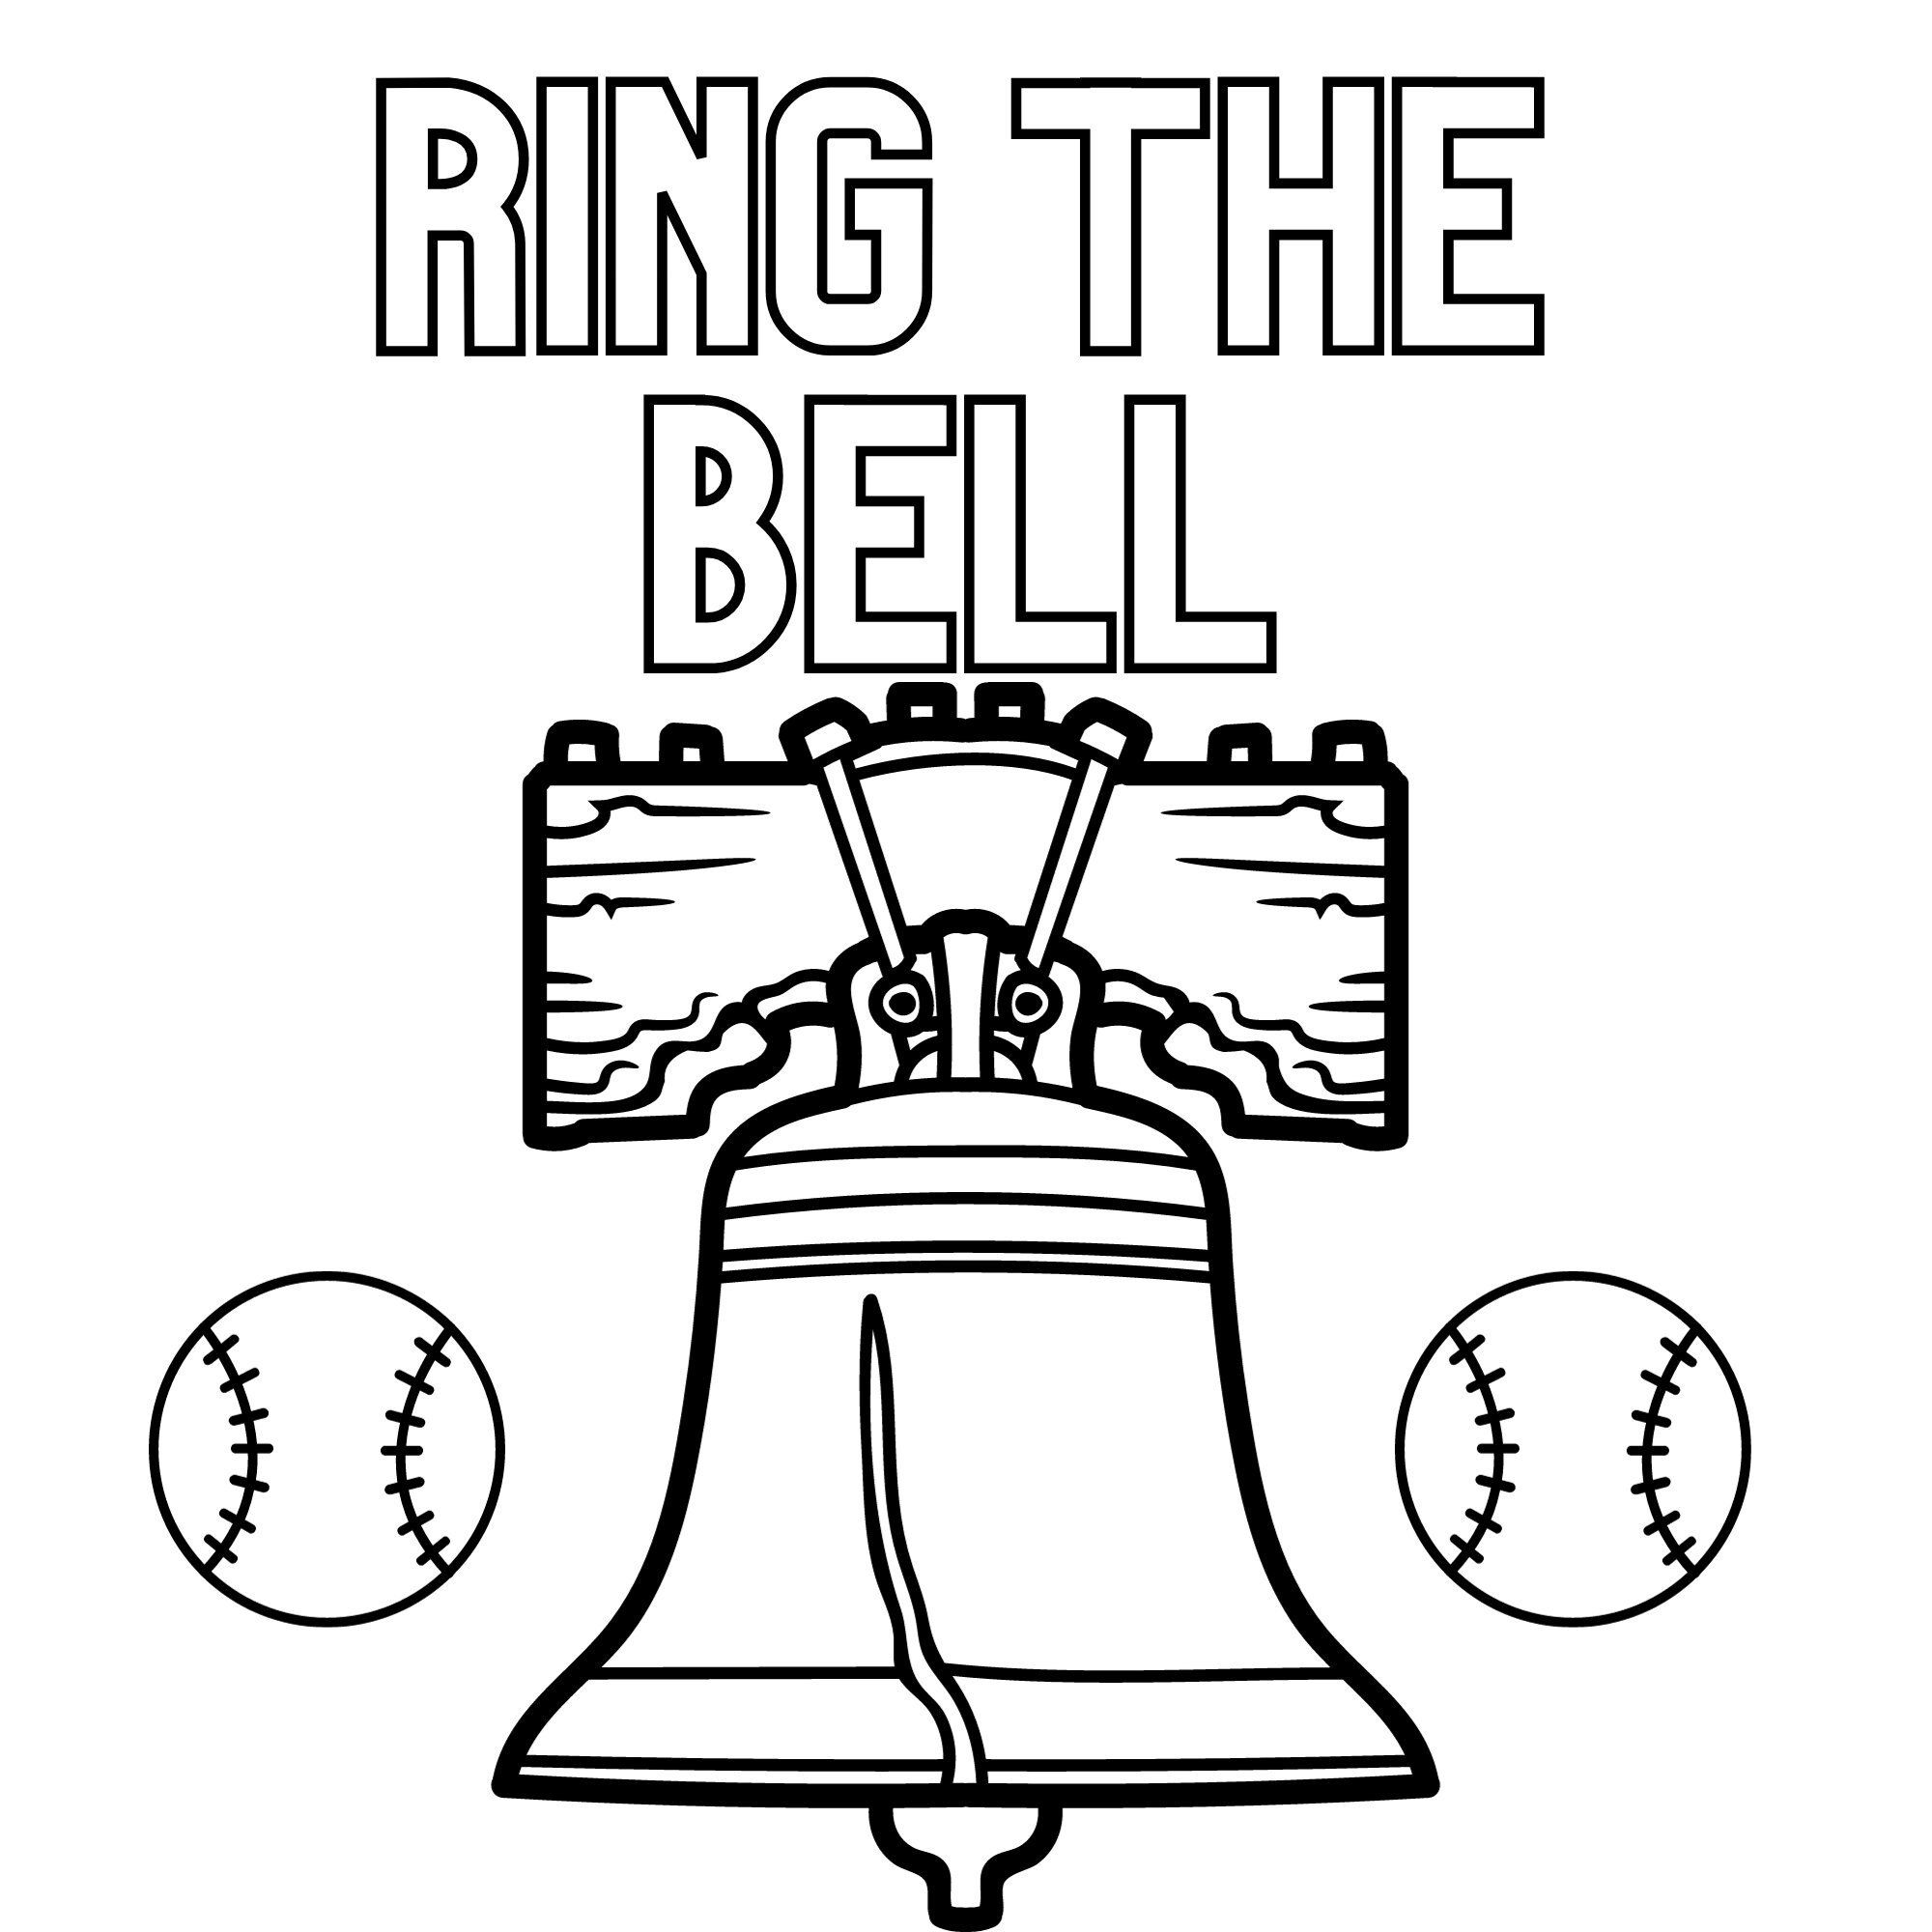 Ring the bell phillies kids printable coloring page download now